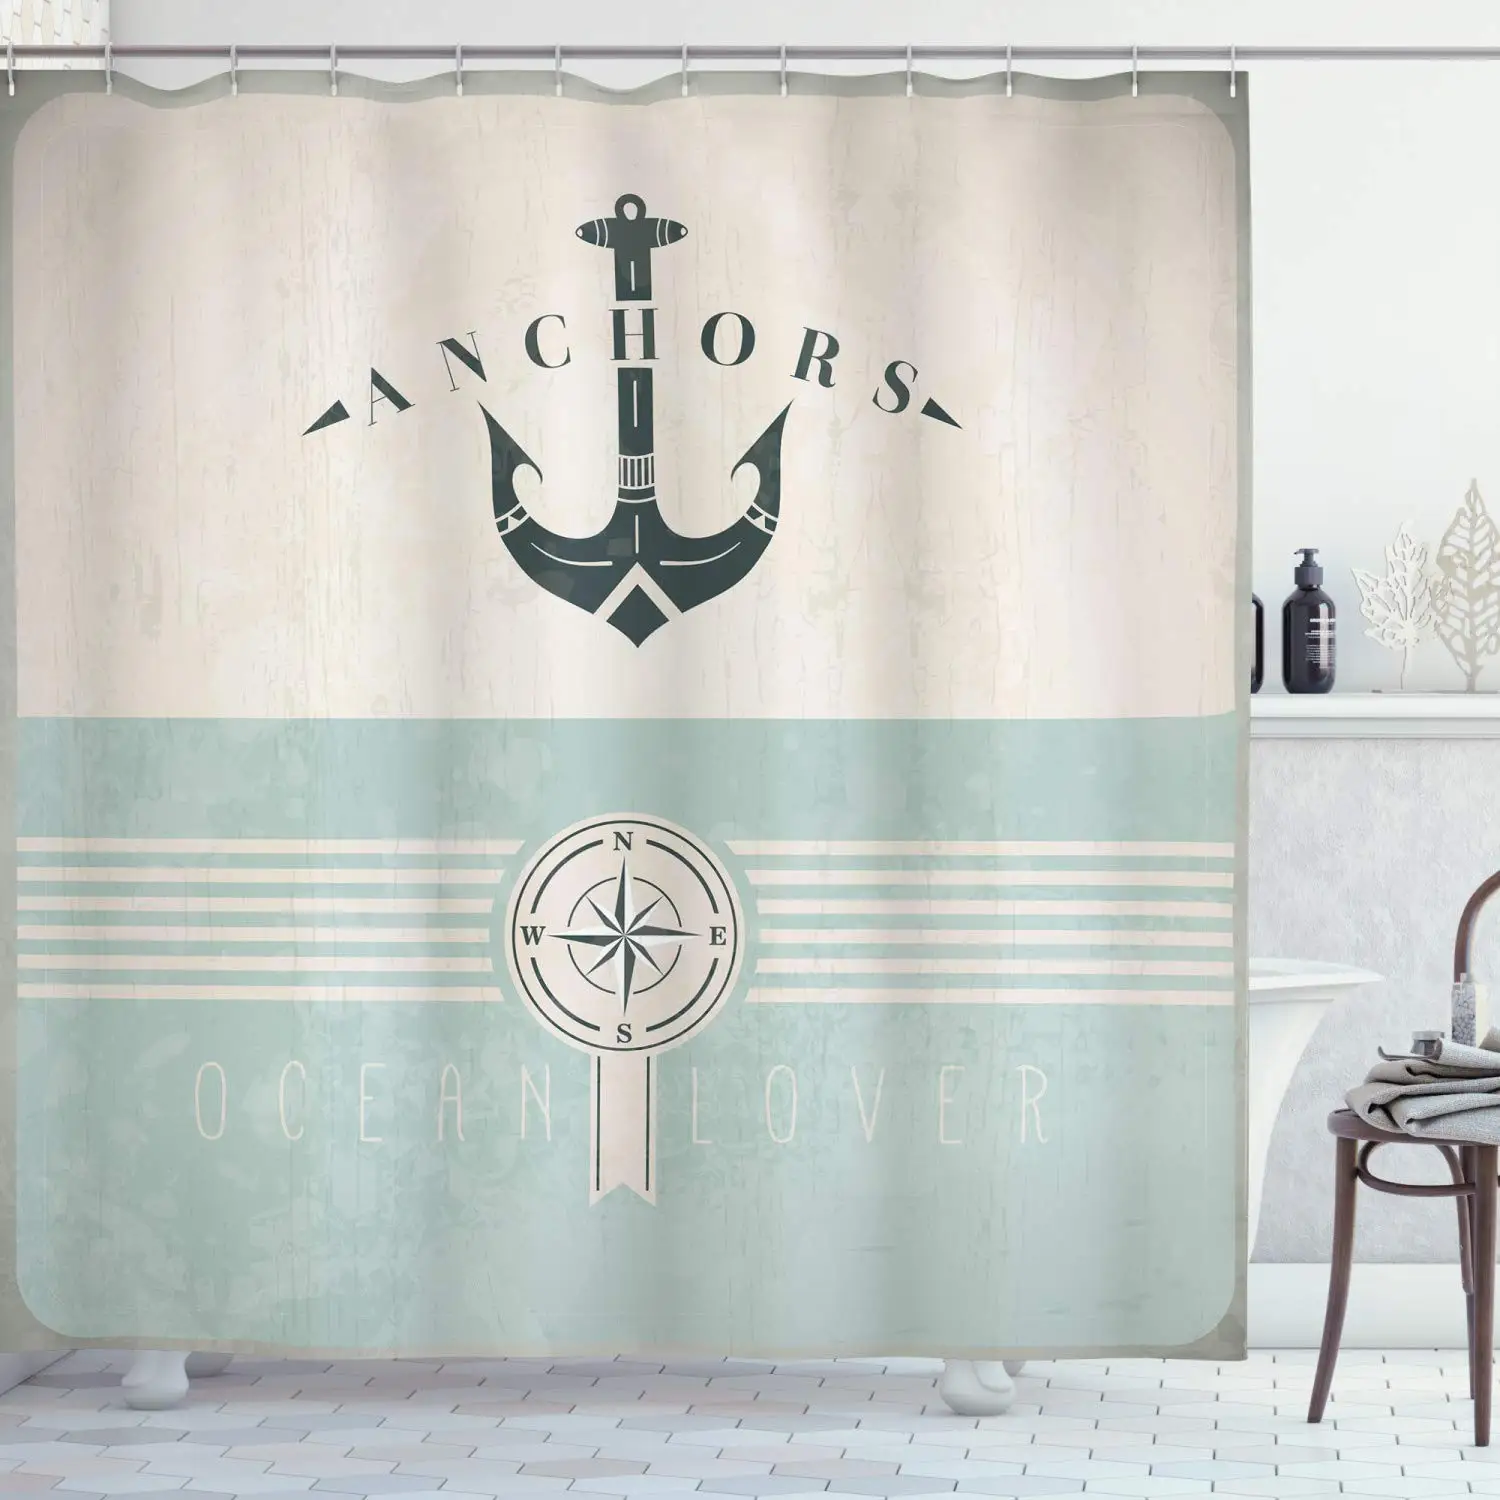 

Nautical Shower Curtain Vintage Marine Design for Ocean Lovers Anchor Compass and Stripes Fabric Bathroom Decor Set with Hooks